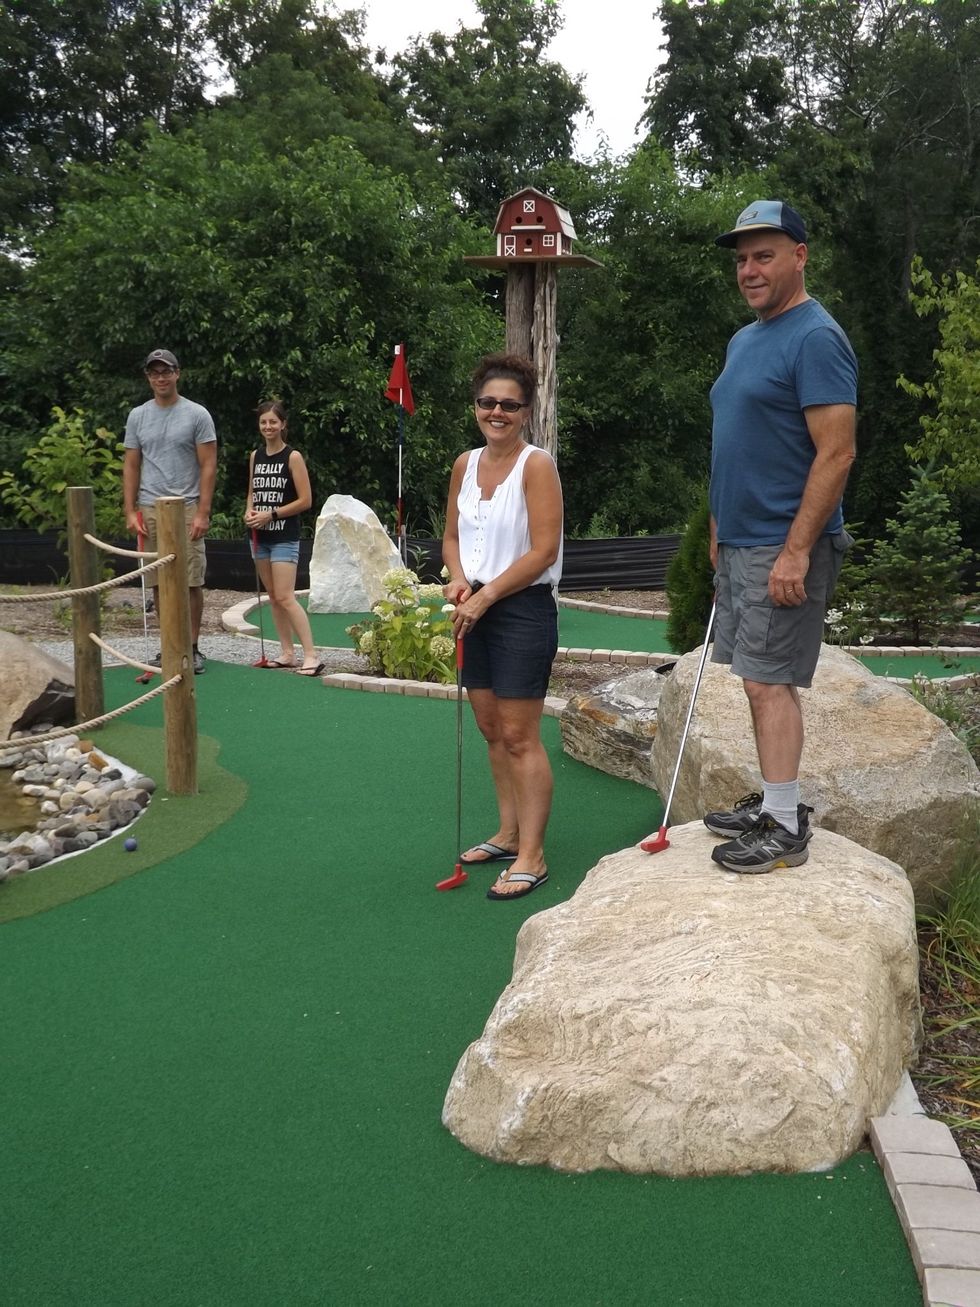 Kelly’s Creamery aces summertime  fun with new mini-golf course